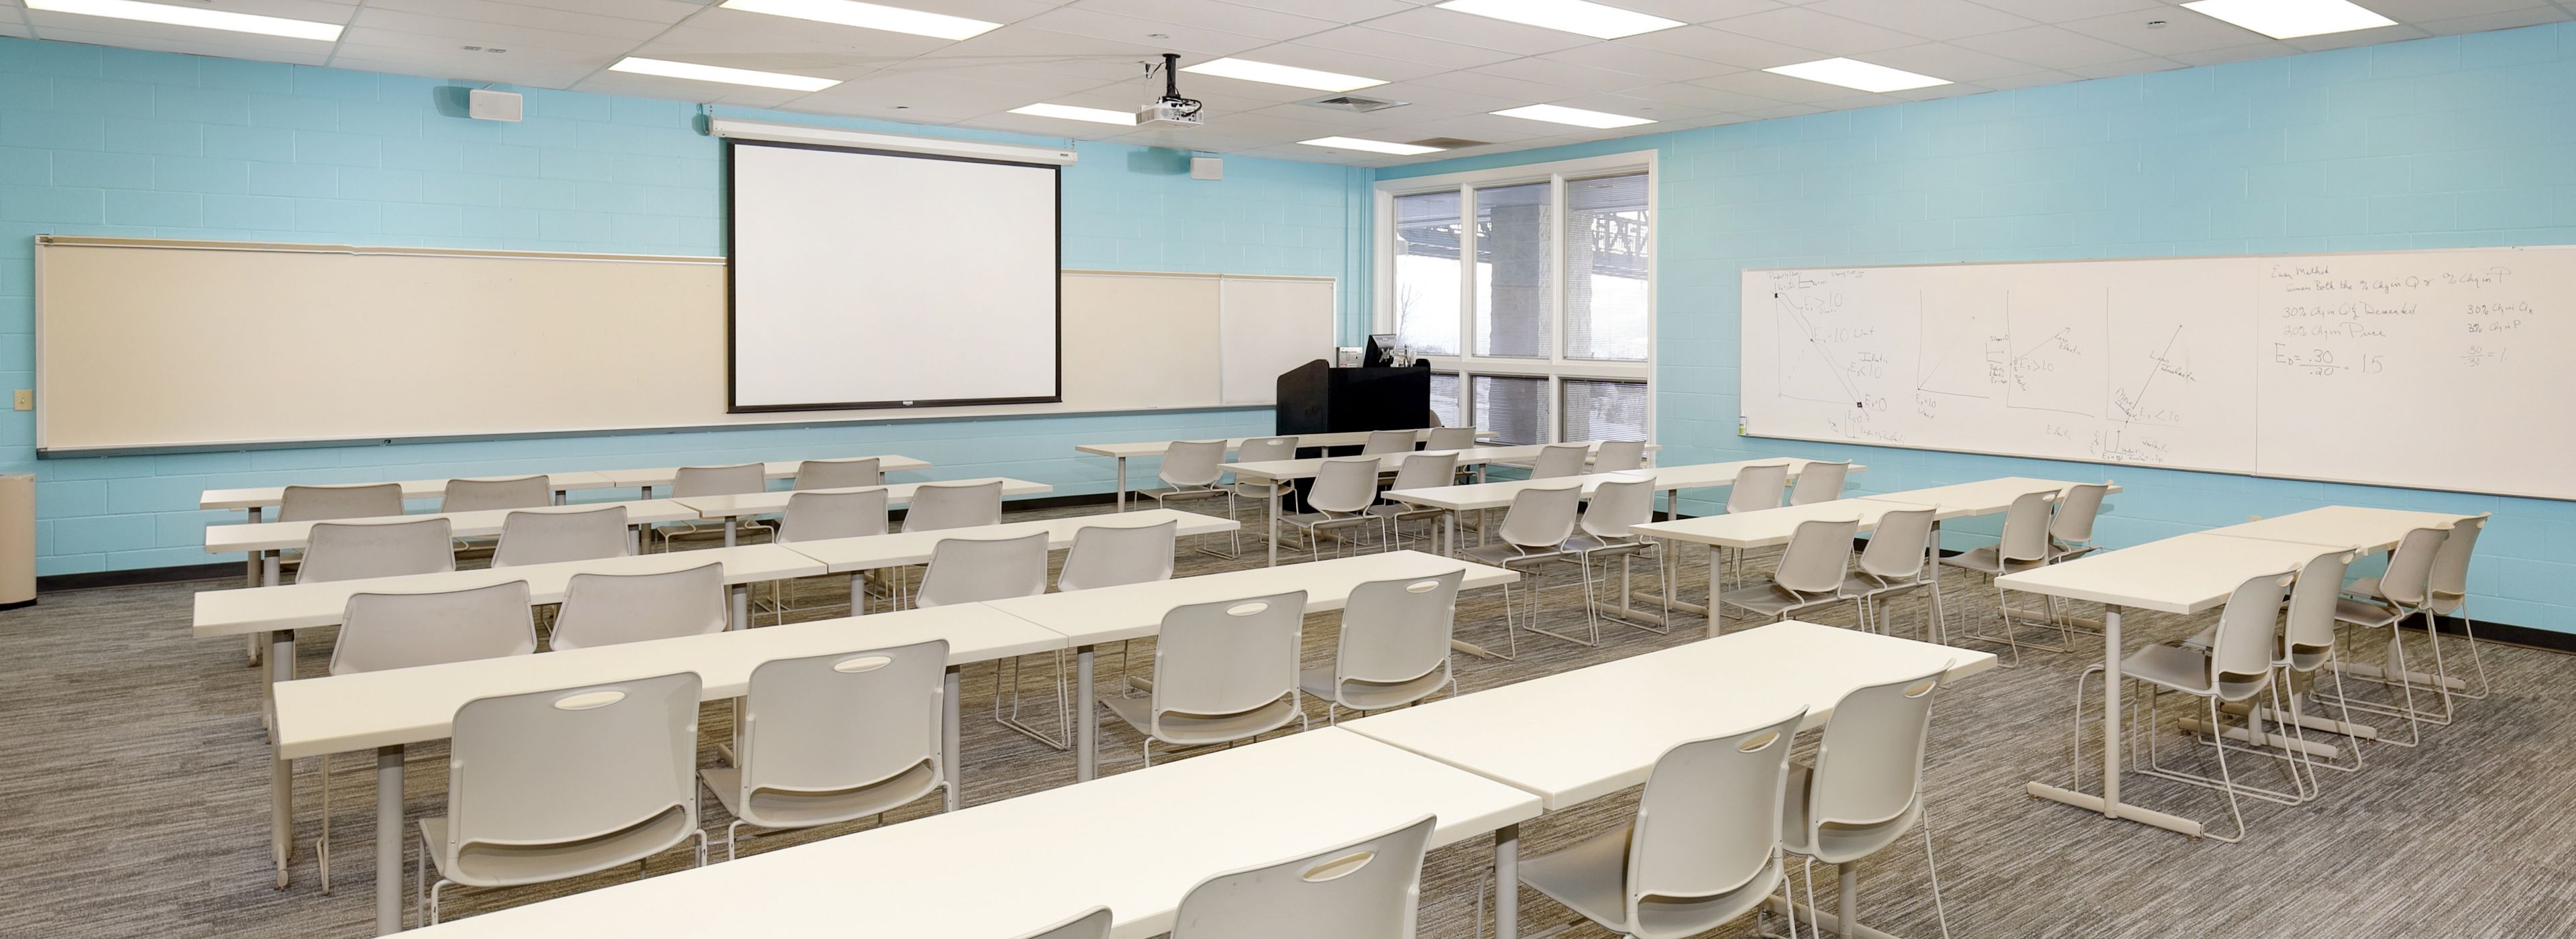 Interface Grooved carpet tile in training room with rows of white tables and chairs imagen número 1